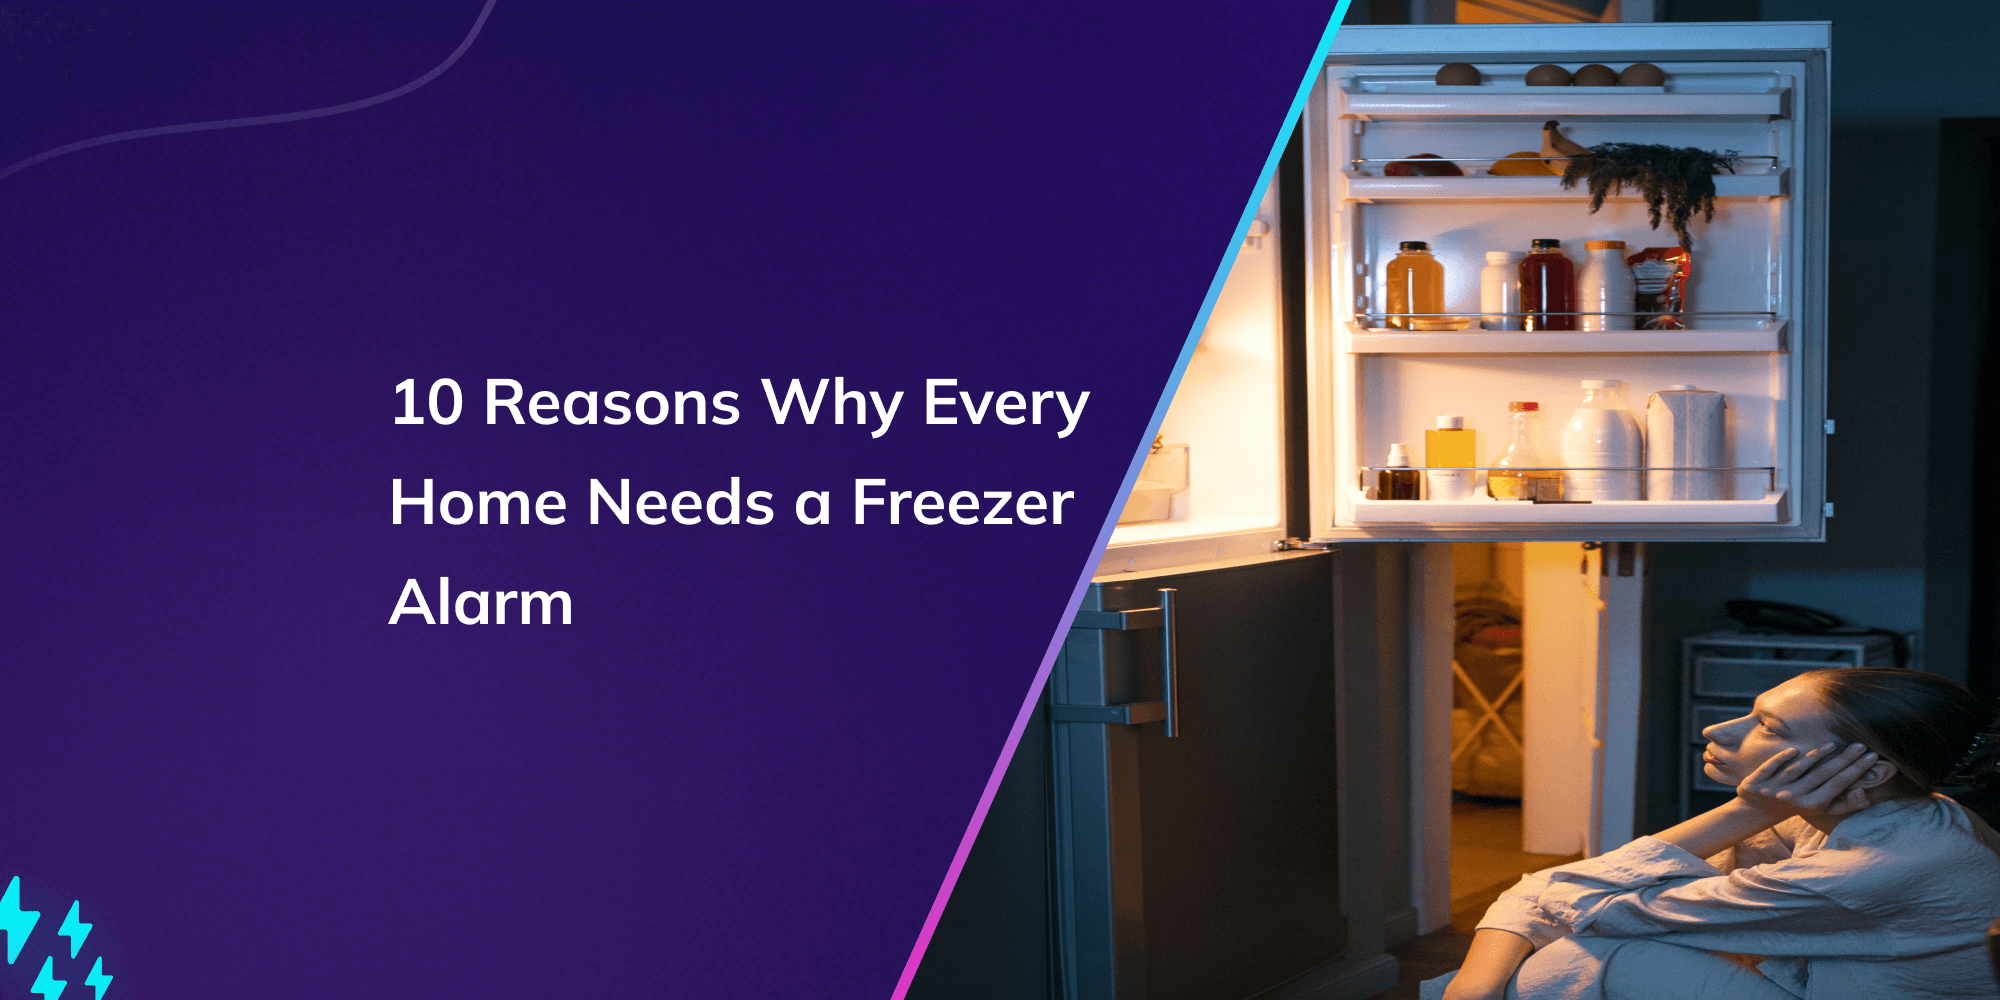 10 Reasons Why Every Home Needs a Freezer Alarm